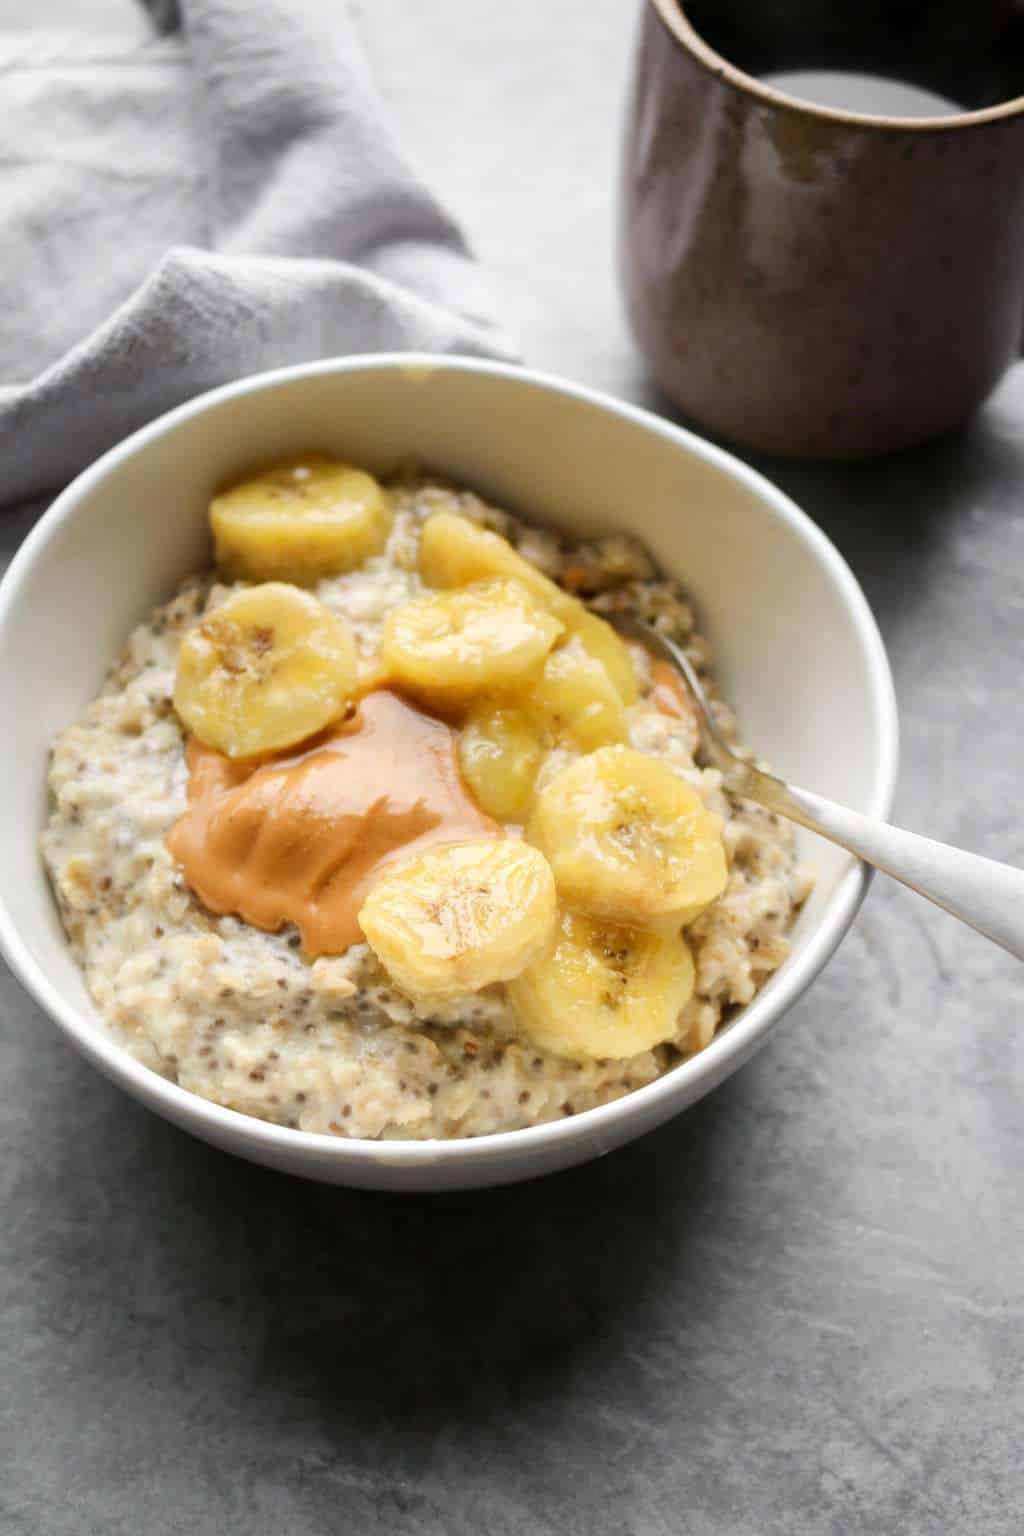 Caramelized banana oatmeal in a bowl with coffee